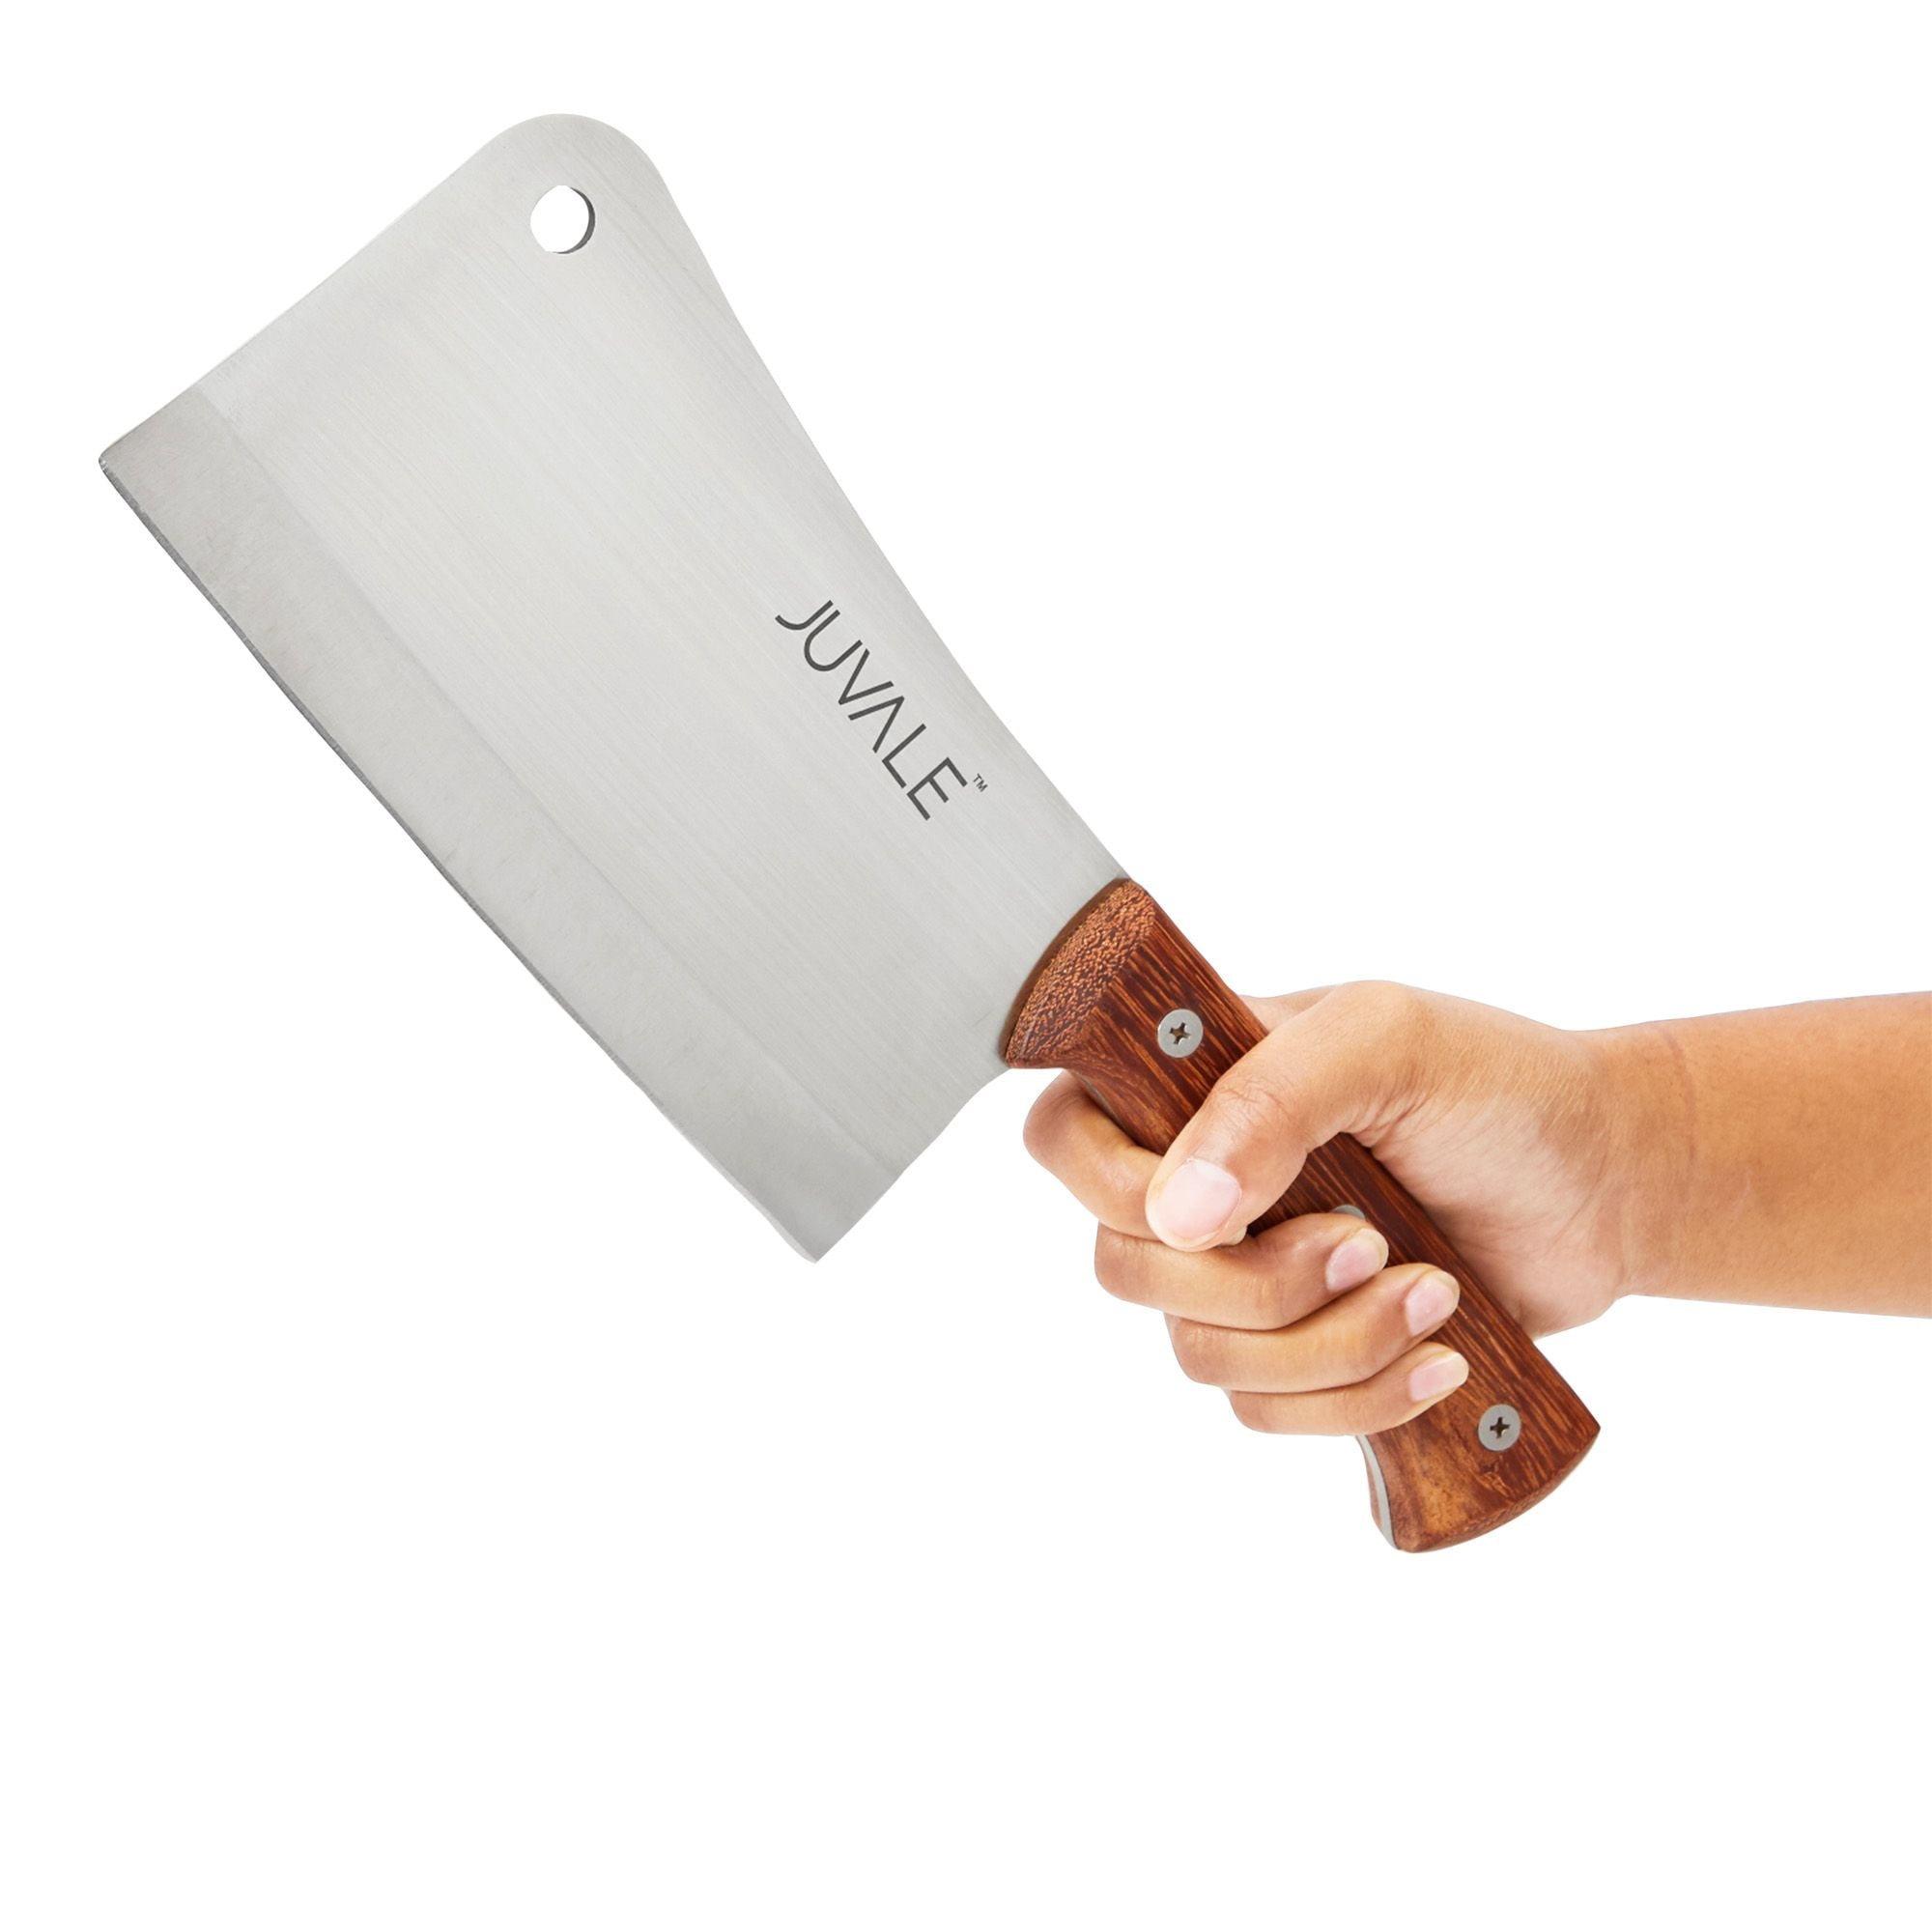 Classic Meat Cleaver — Route83 Knives